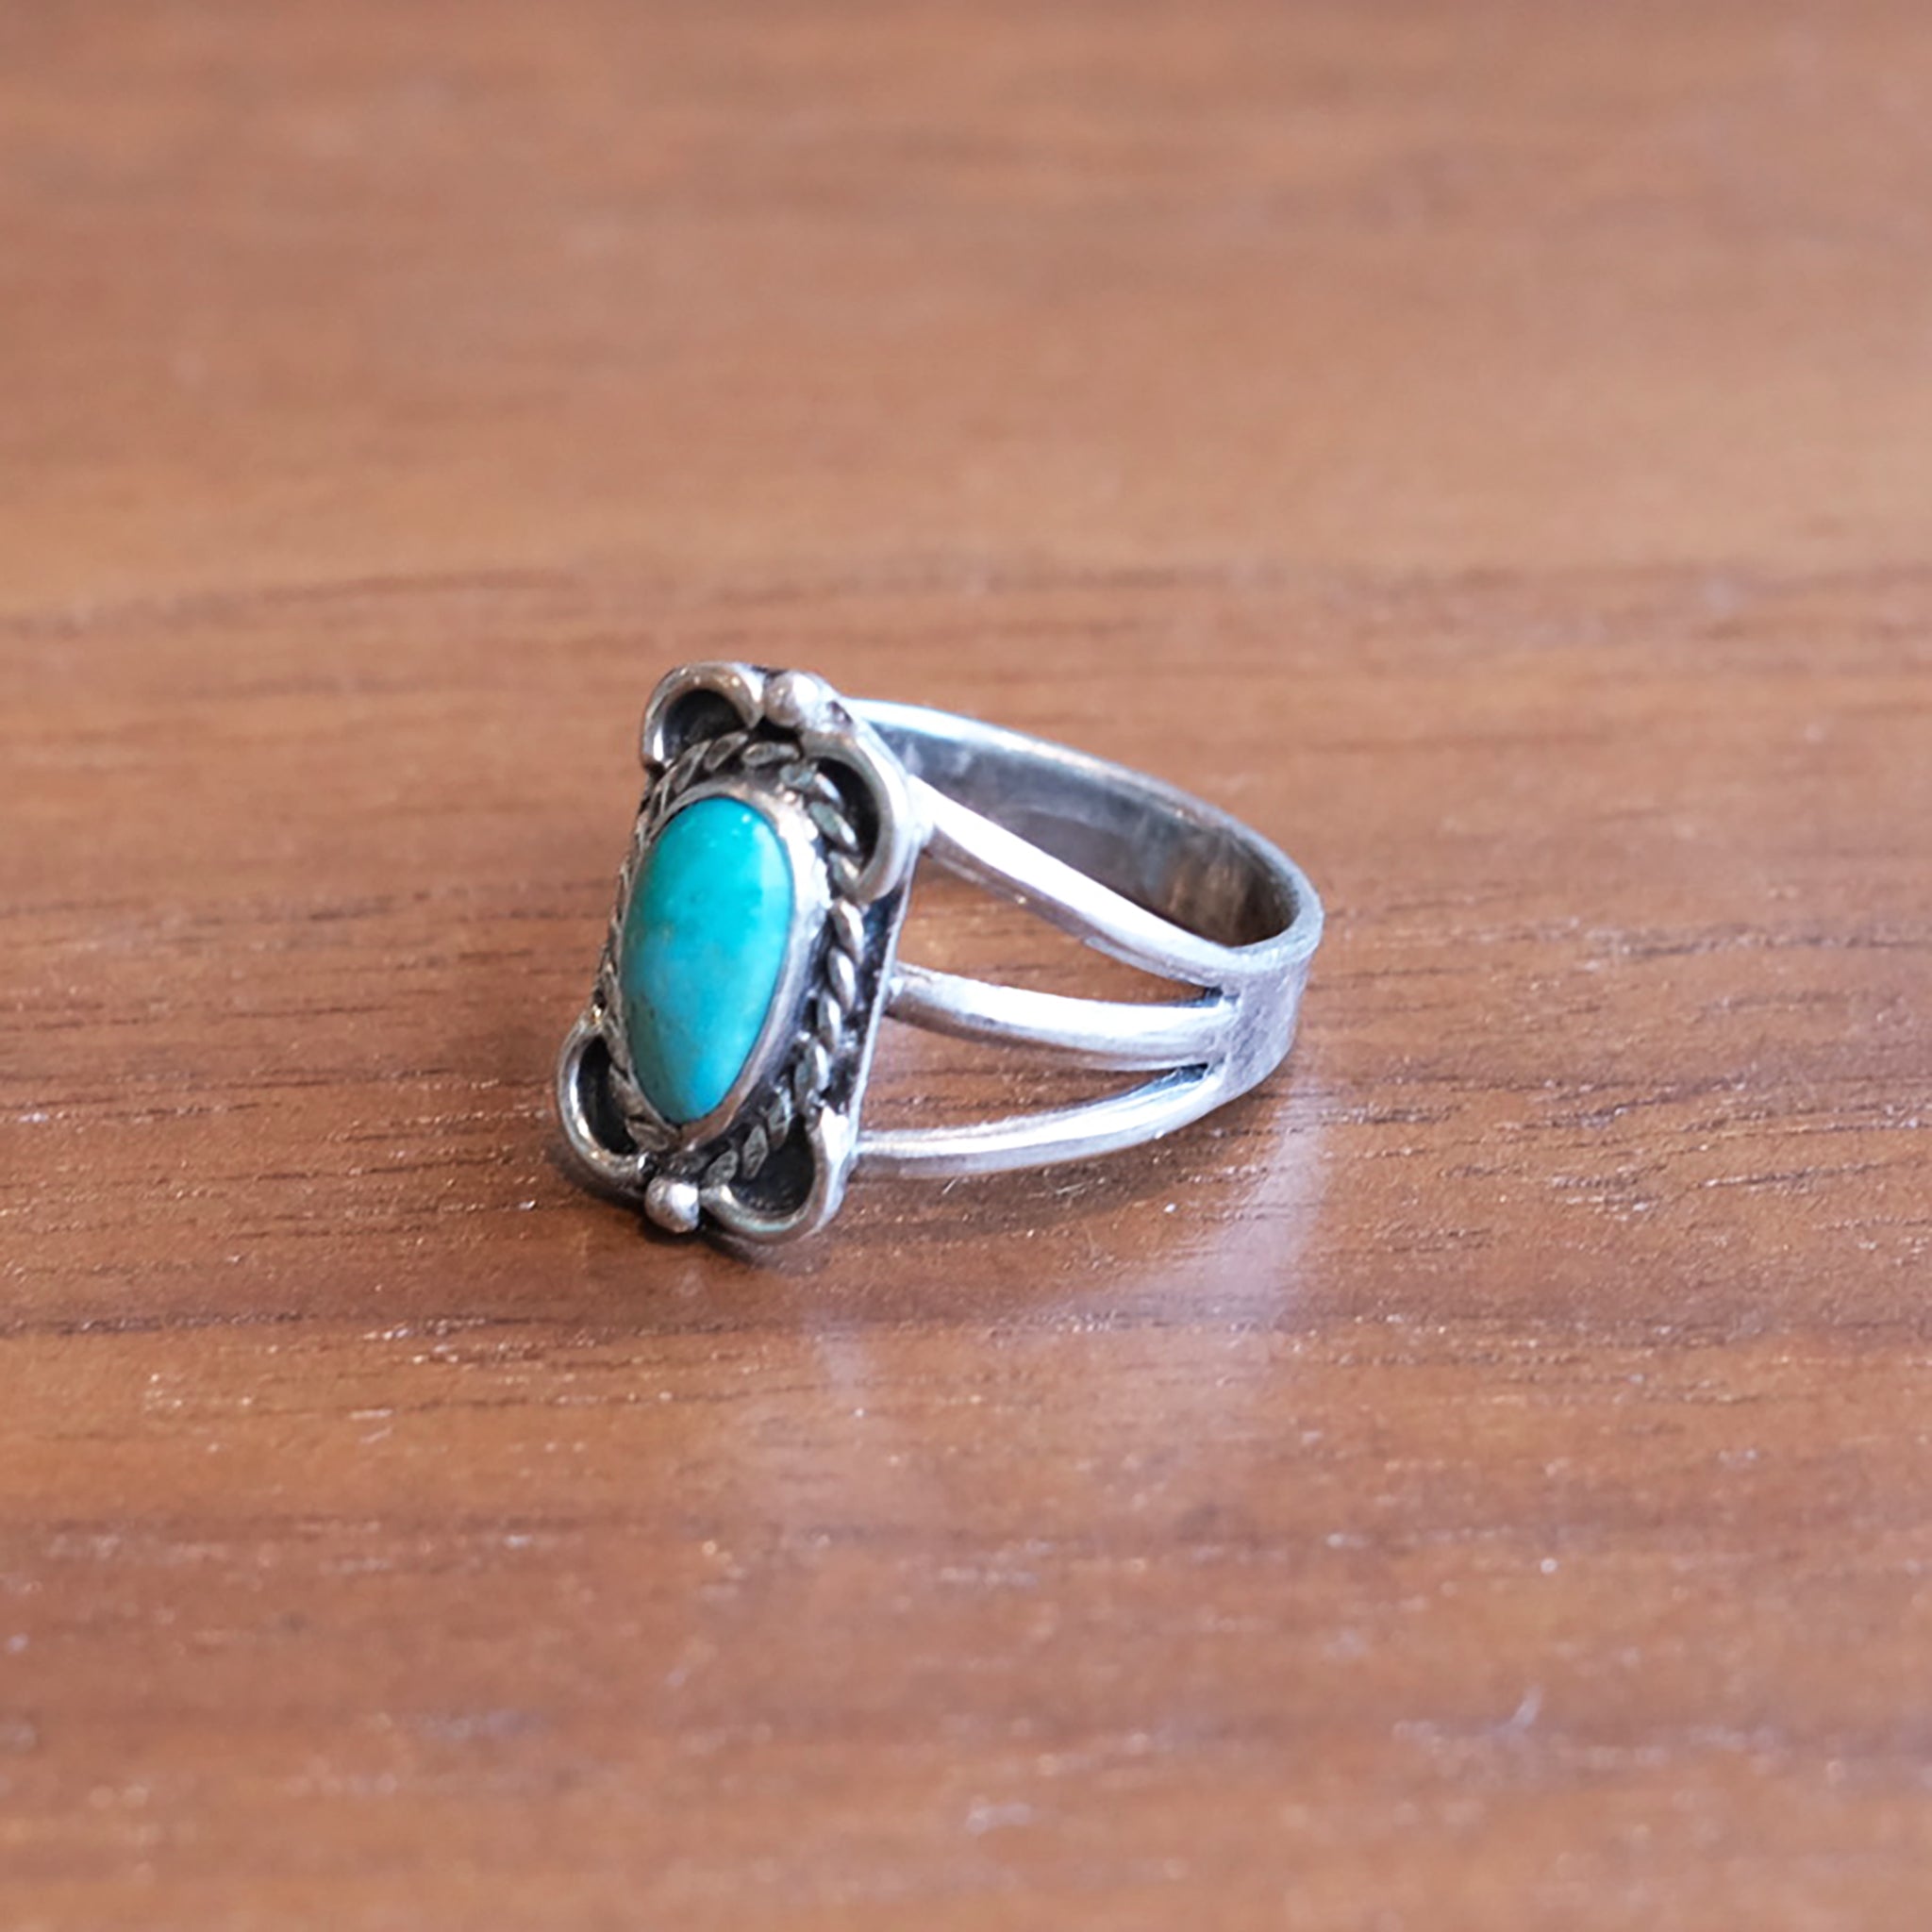 Light Turquoise Oval Ring Braid Setting